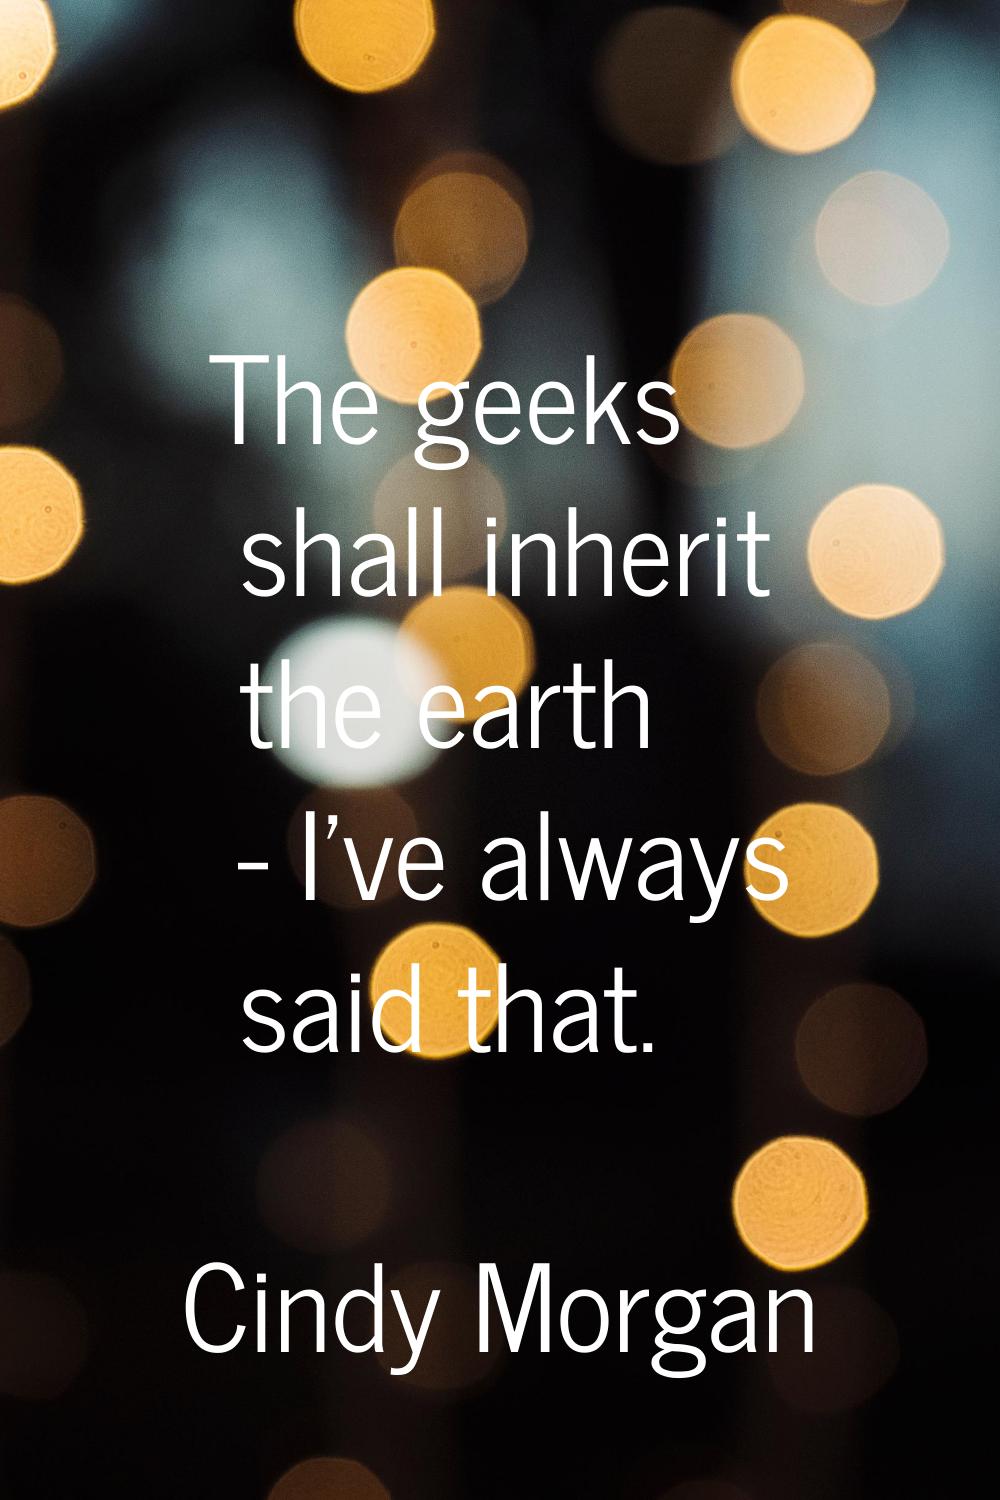 The geeks shall inherit the earth - I've always said that.